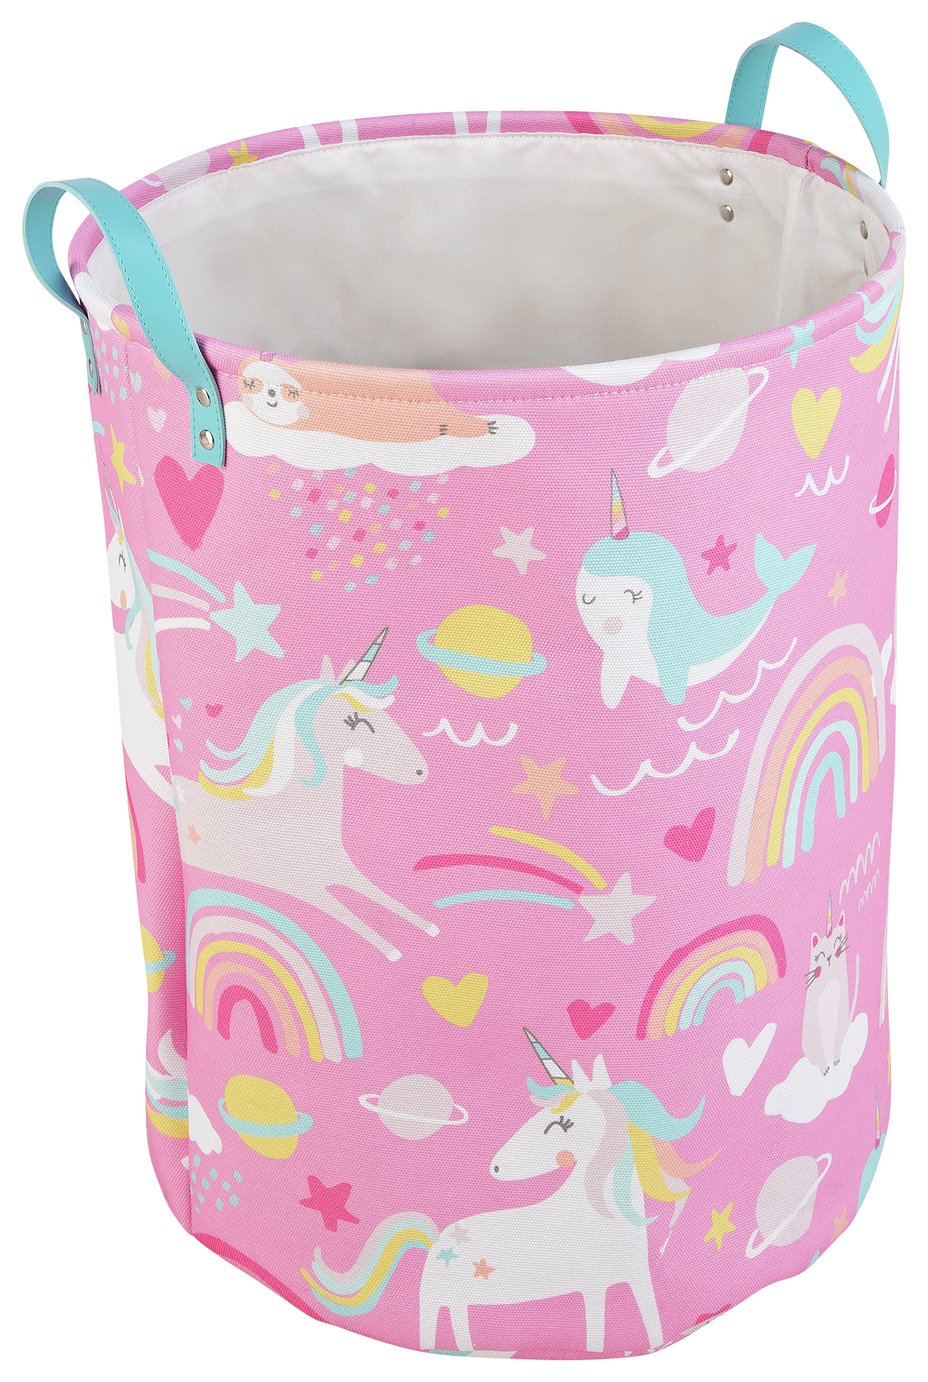 Argos Home Narwhale Kids Laundry Bag - Pink & Blue